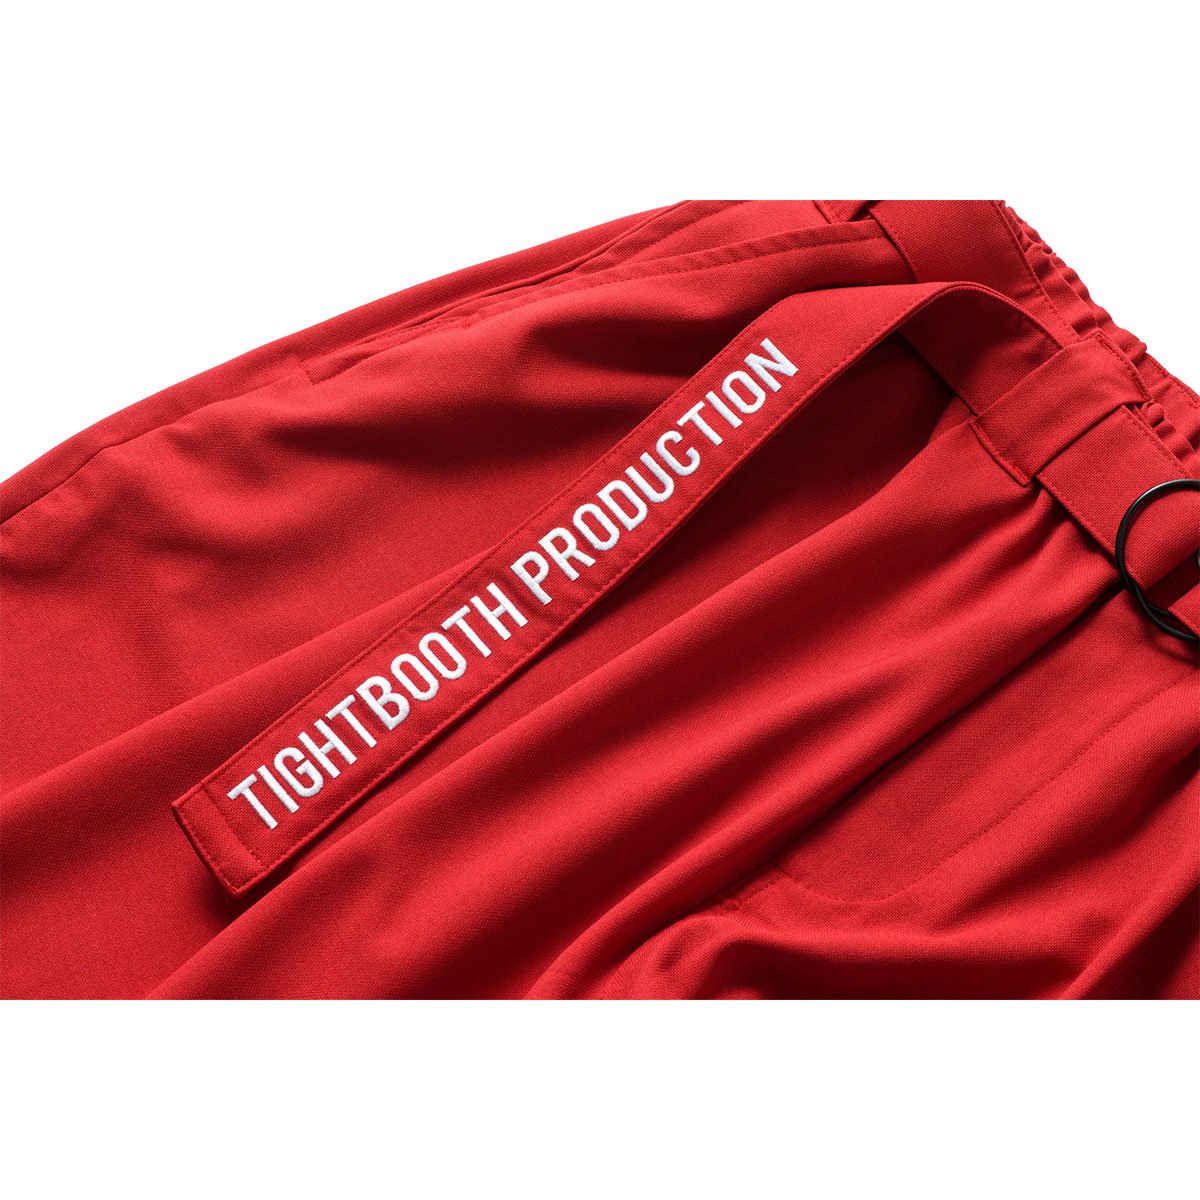 CANAPA CROPPED PANTS - TIGHTBOOTH PRODUCTION